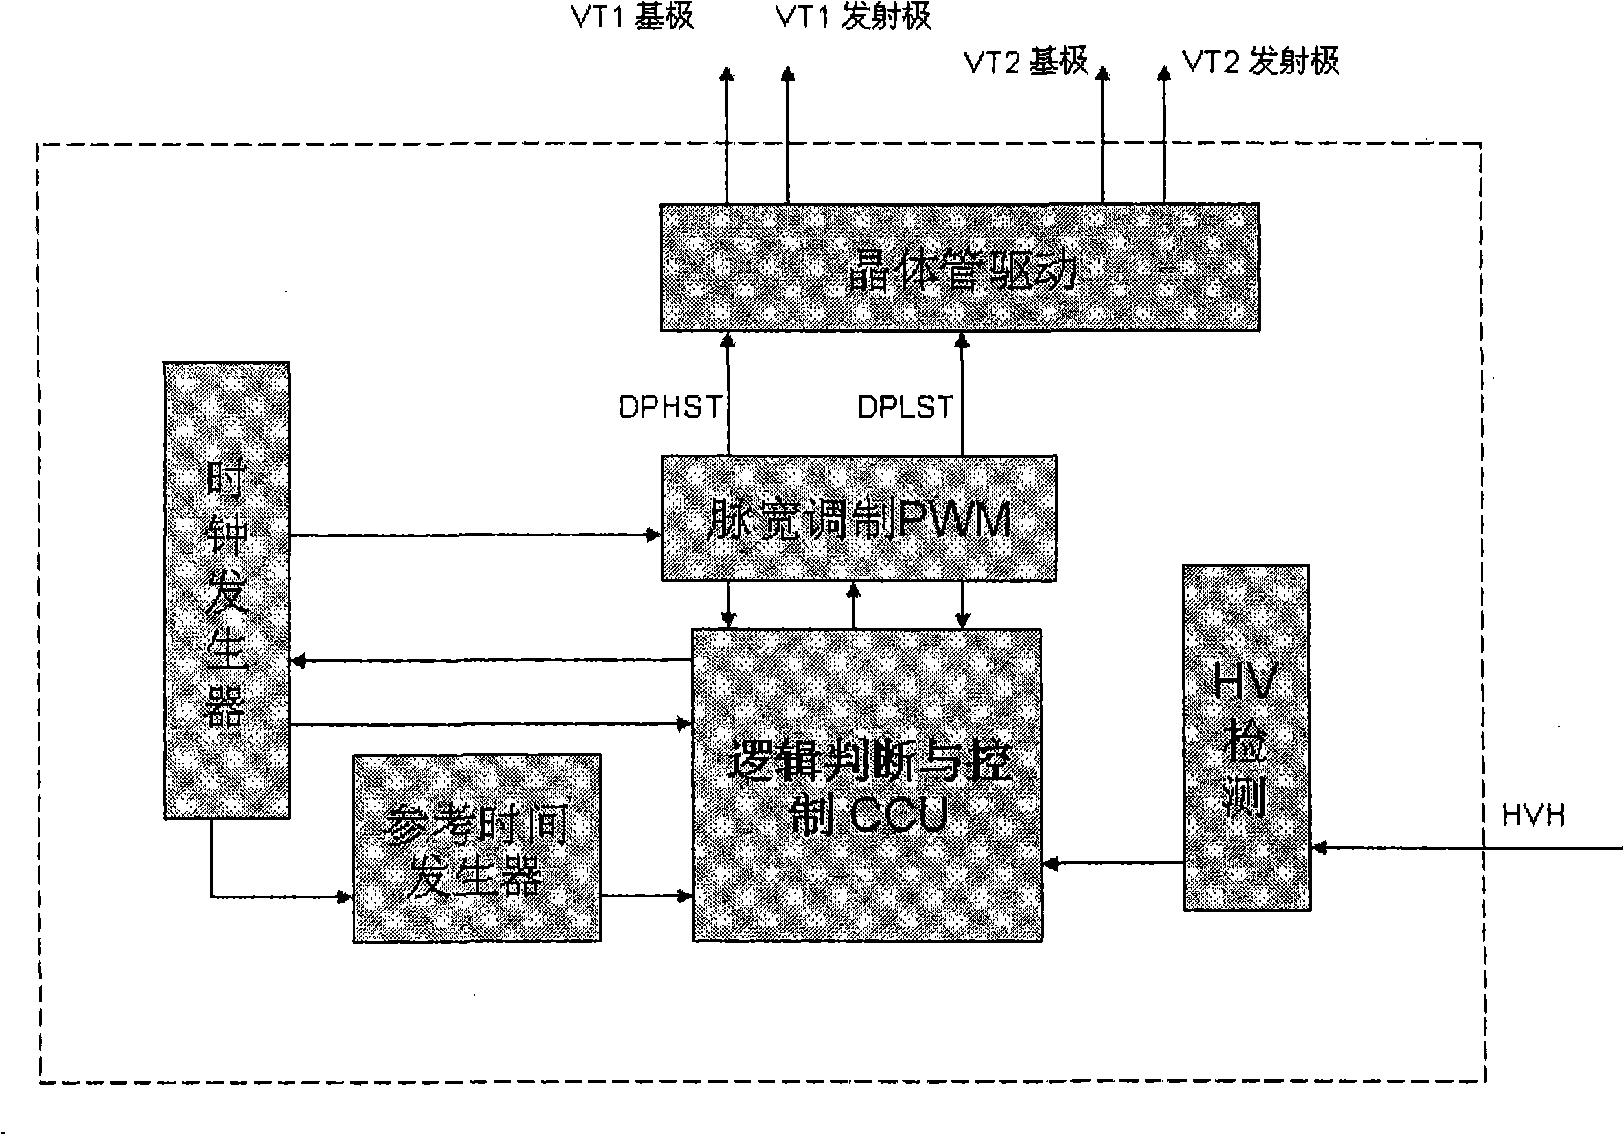 Driving and regulating method and device for bipolar transistor in electric ballast